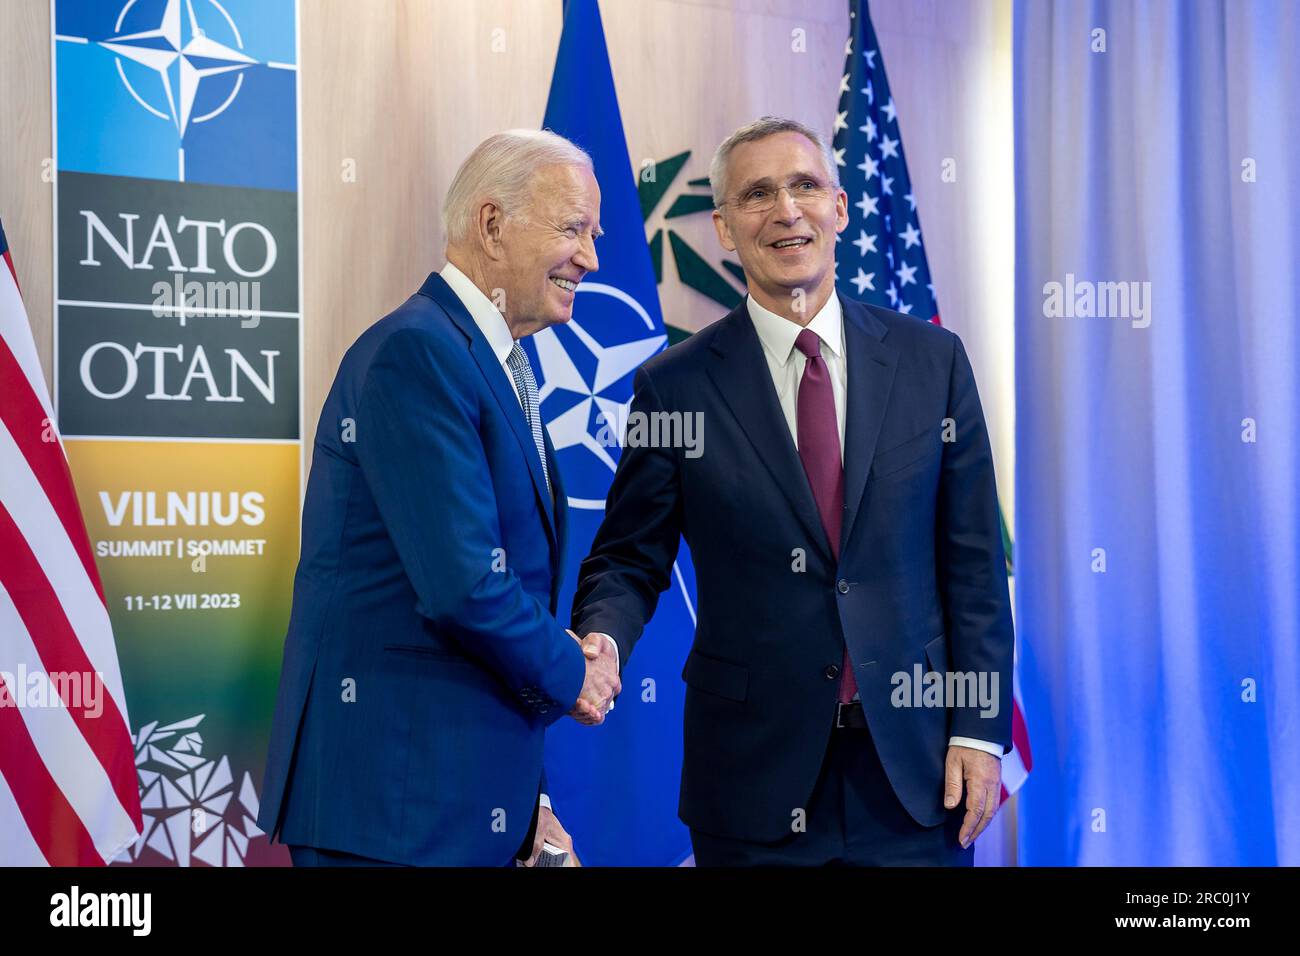 Vilnius, Lithuania. 11th July, 2023. U.S President Joe Biden, left, shakes hands with NATO Secretary General Jens Stoltenberg, right, before a bilateral meeting on the sidelines of the NATO Summit at the Lithuanian Exhibition and Congress Center, July 11, 2023 in Vilnius, Lithuania. Credit: Adam Schultz/White House Photo/Alamy Live News Stock Photo